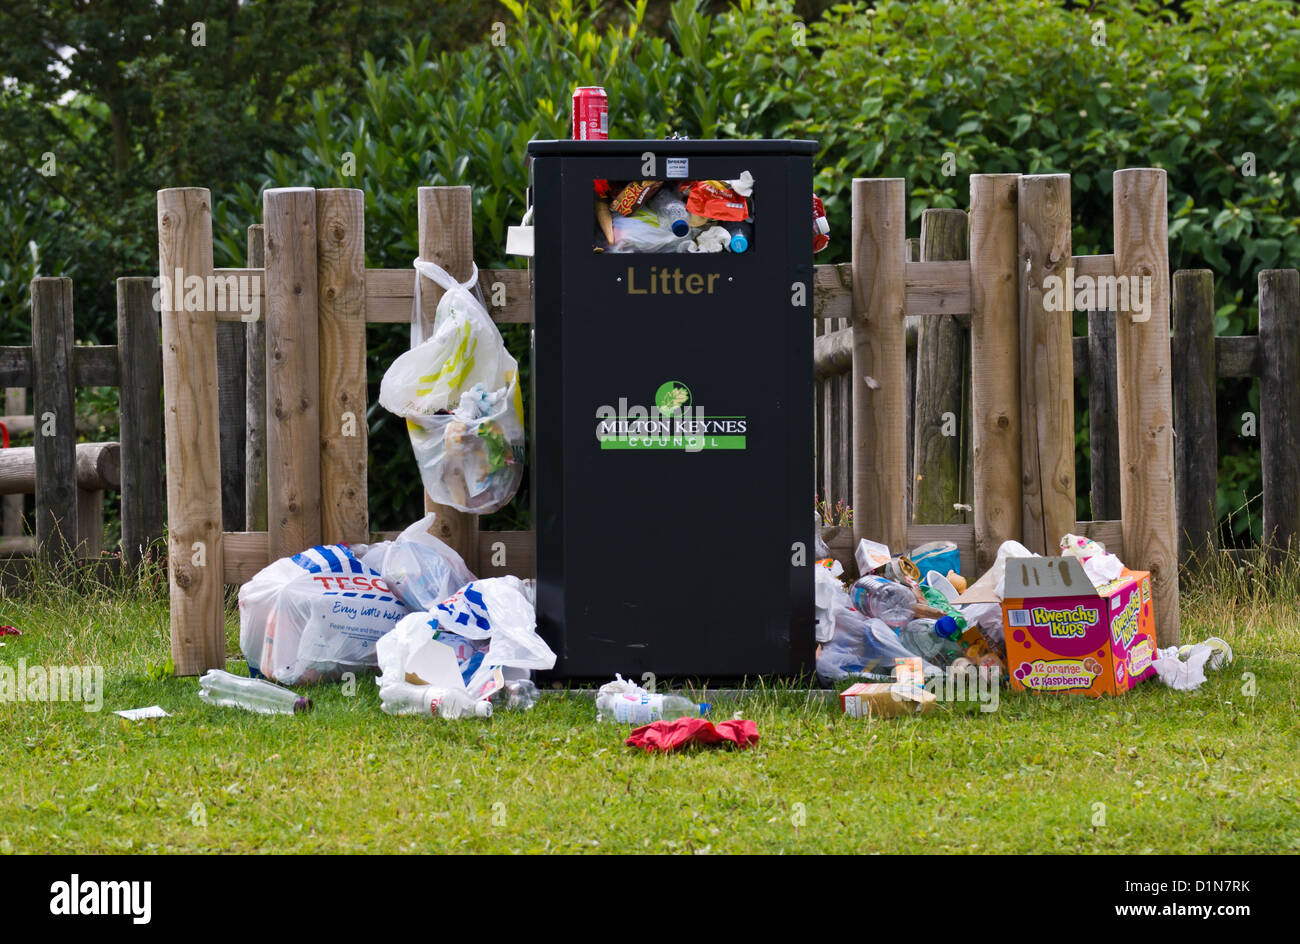 Rubbish overflowing a bin in a park Stock Photo